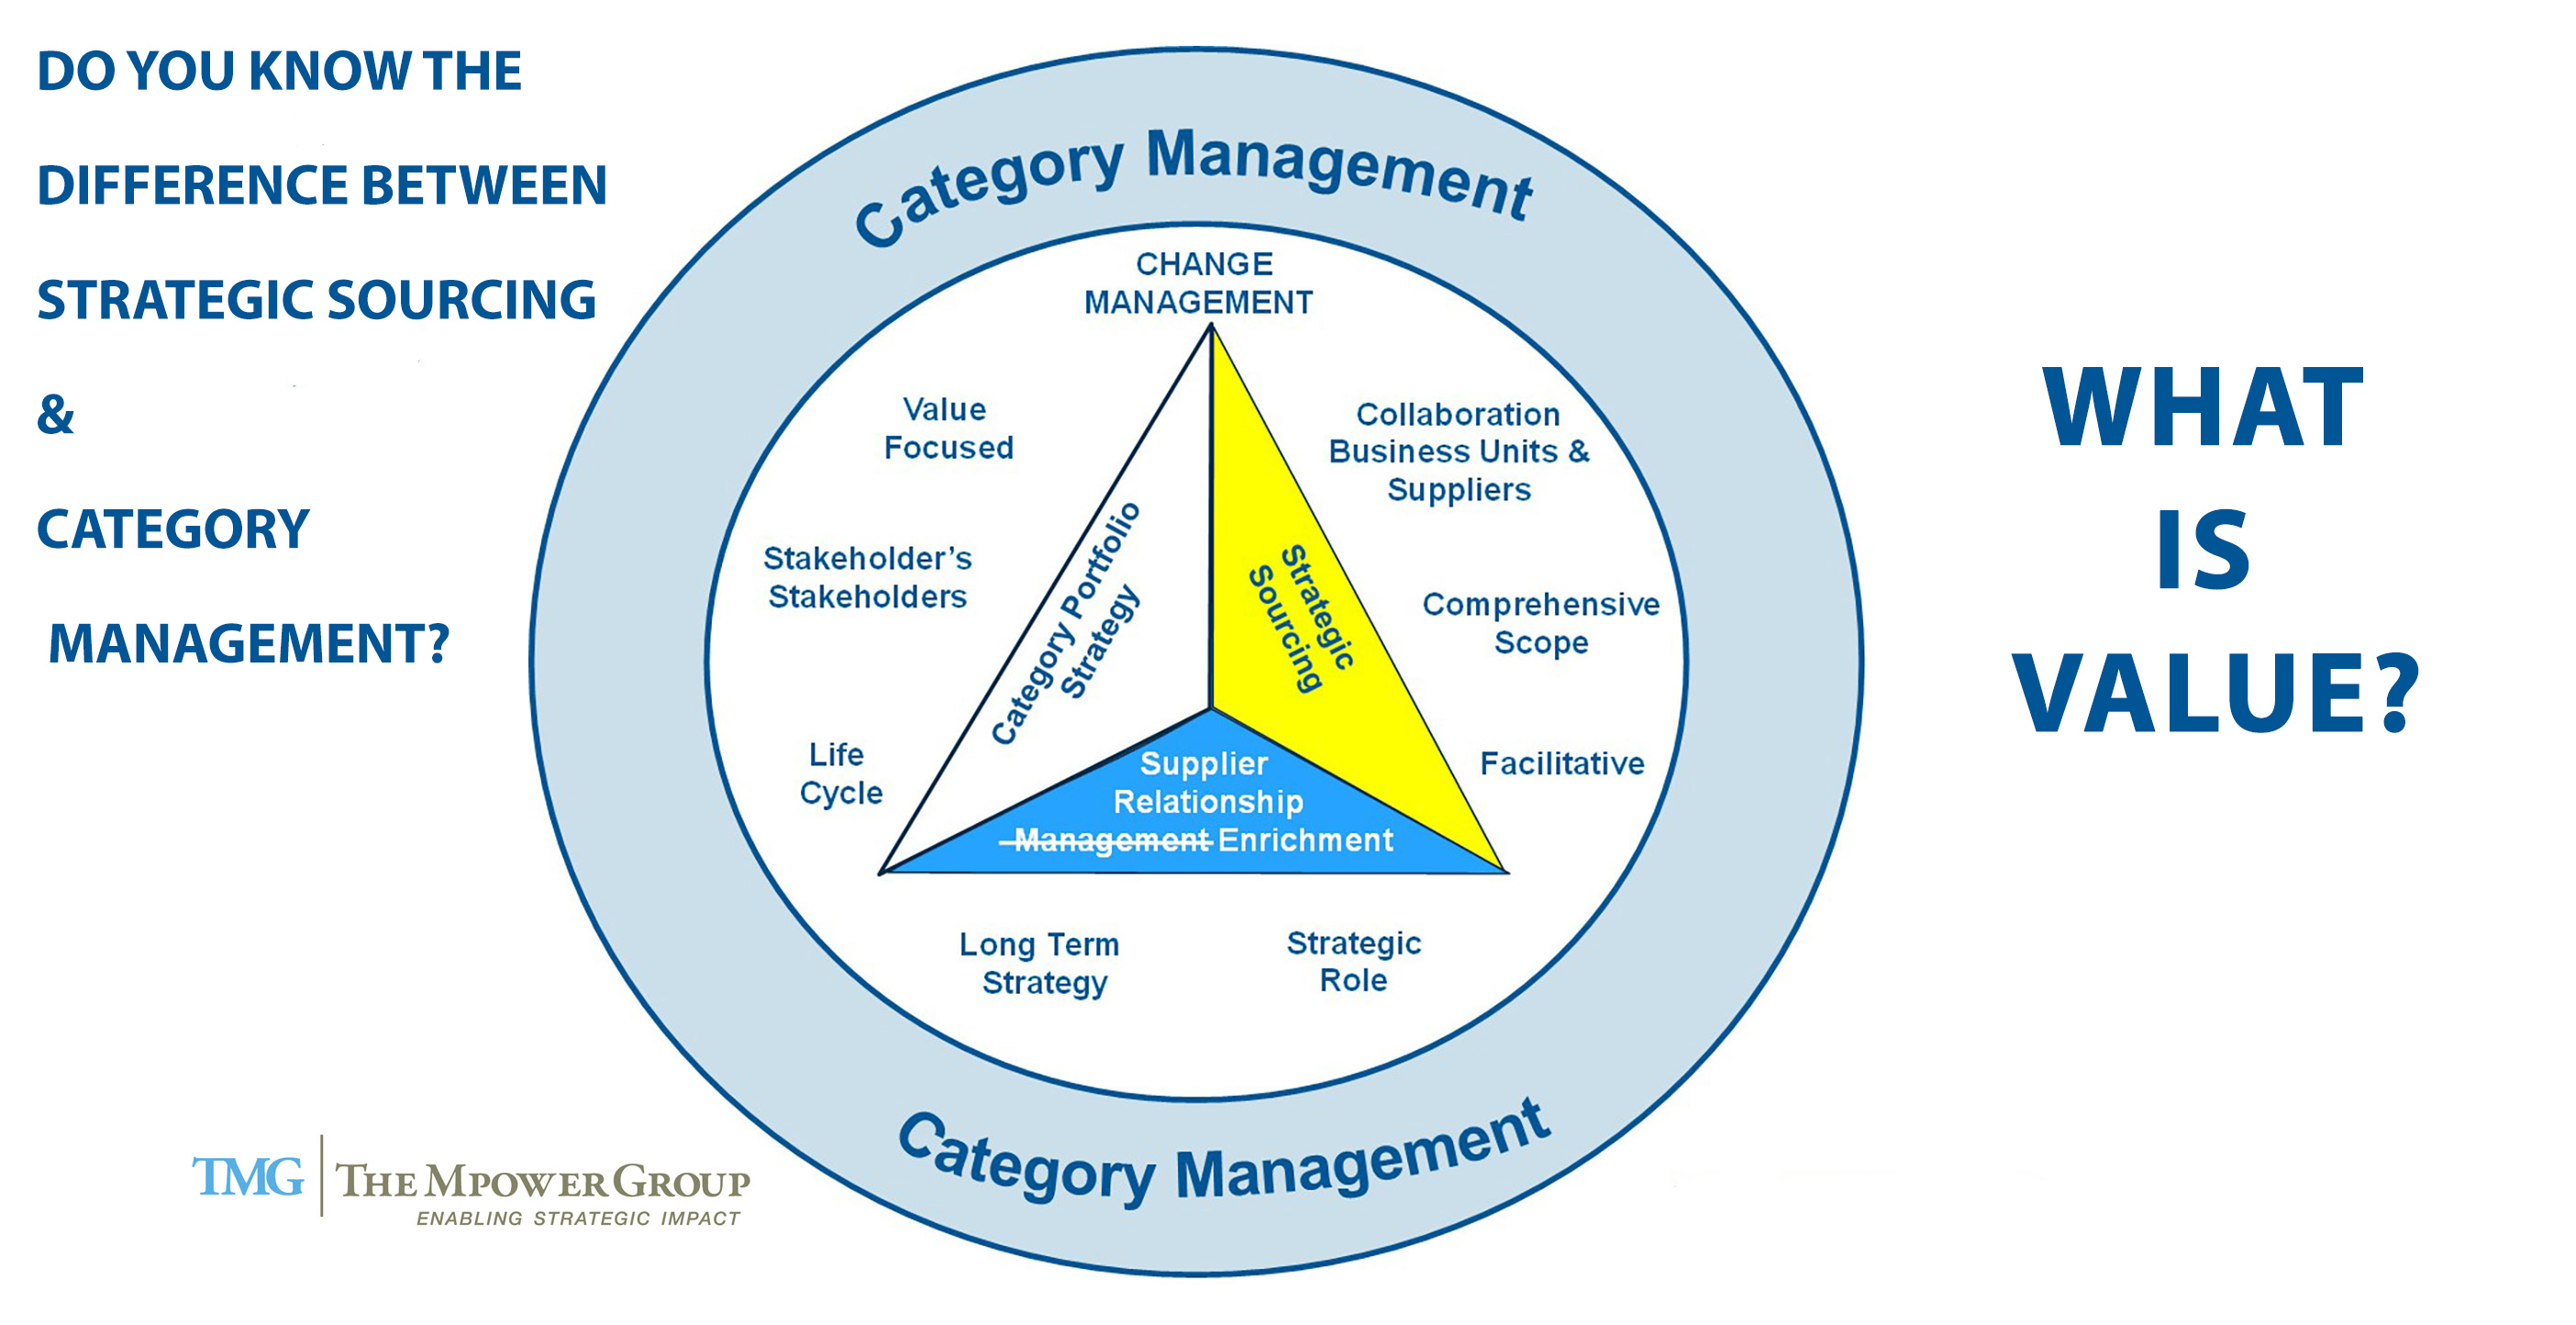 Do You Know the Difference Between Strategic Sourcing and Category